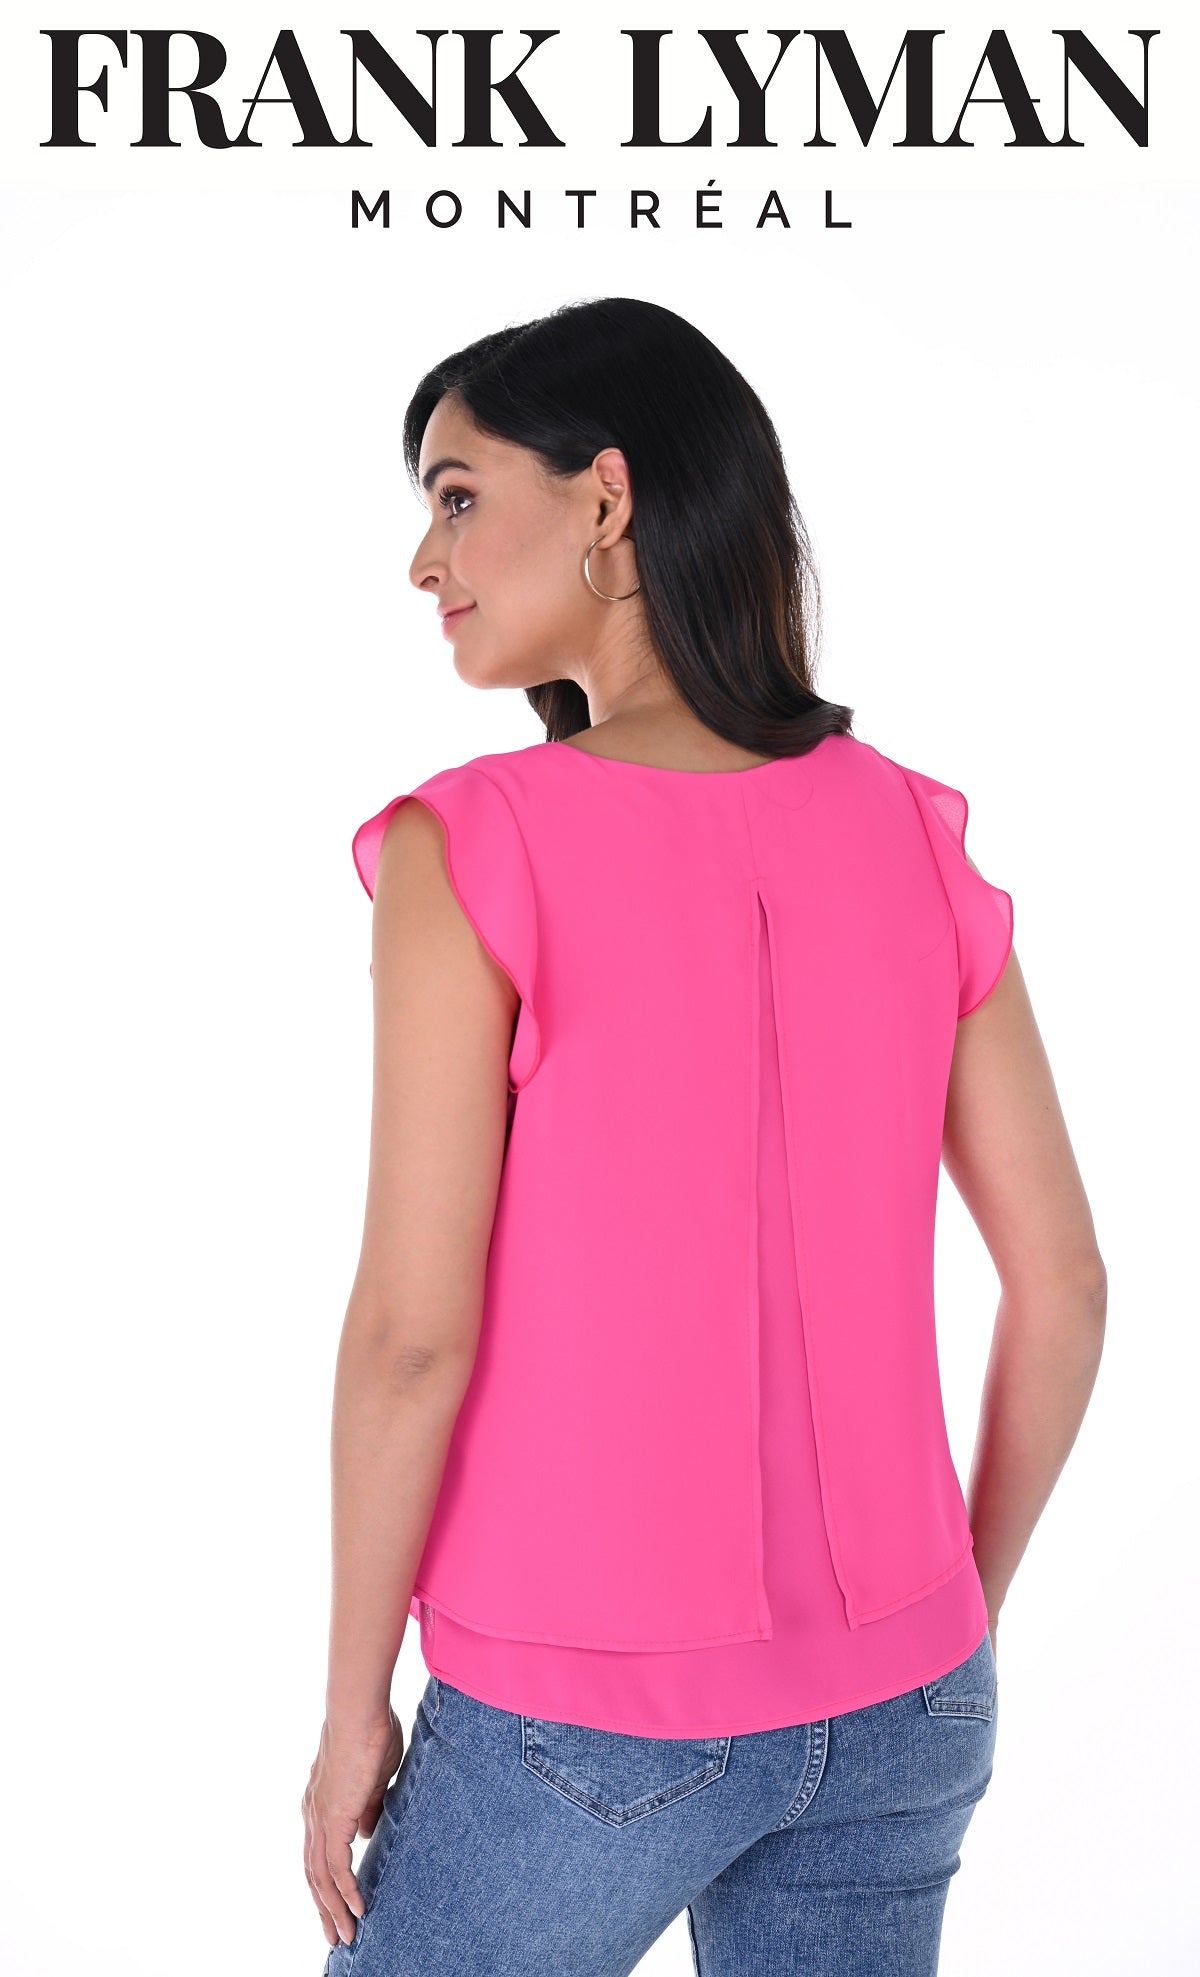 Frank Lyman Montreal Hot Pink Sleeveless Top With Ruffle Shoulder Detail